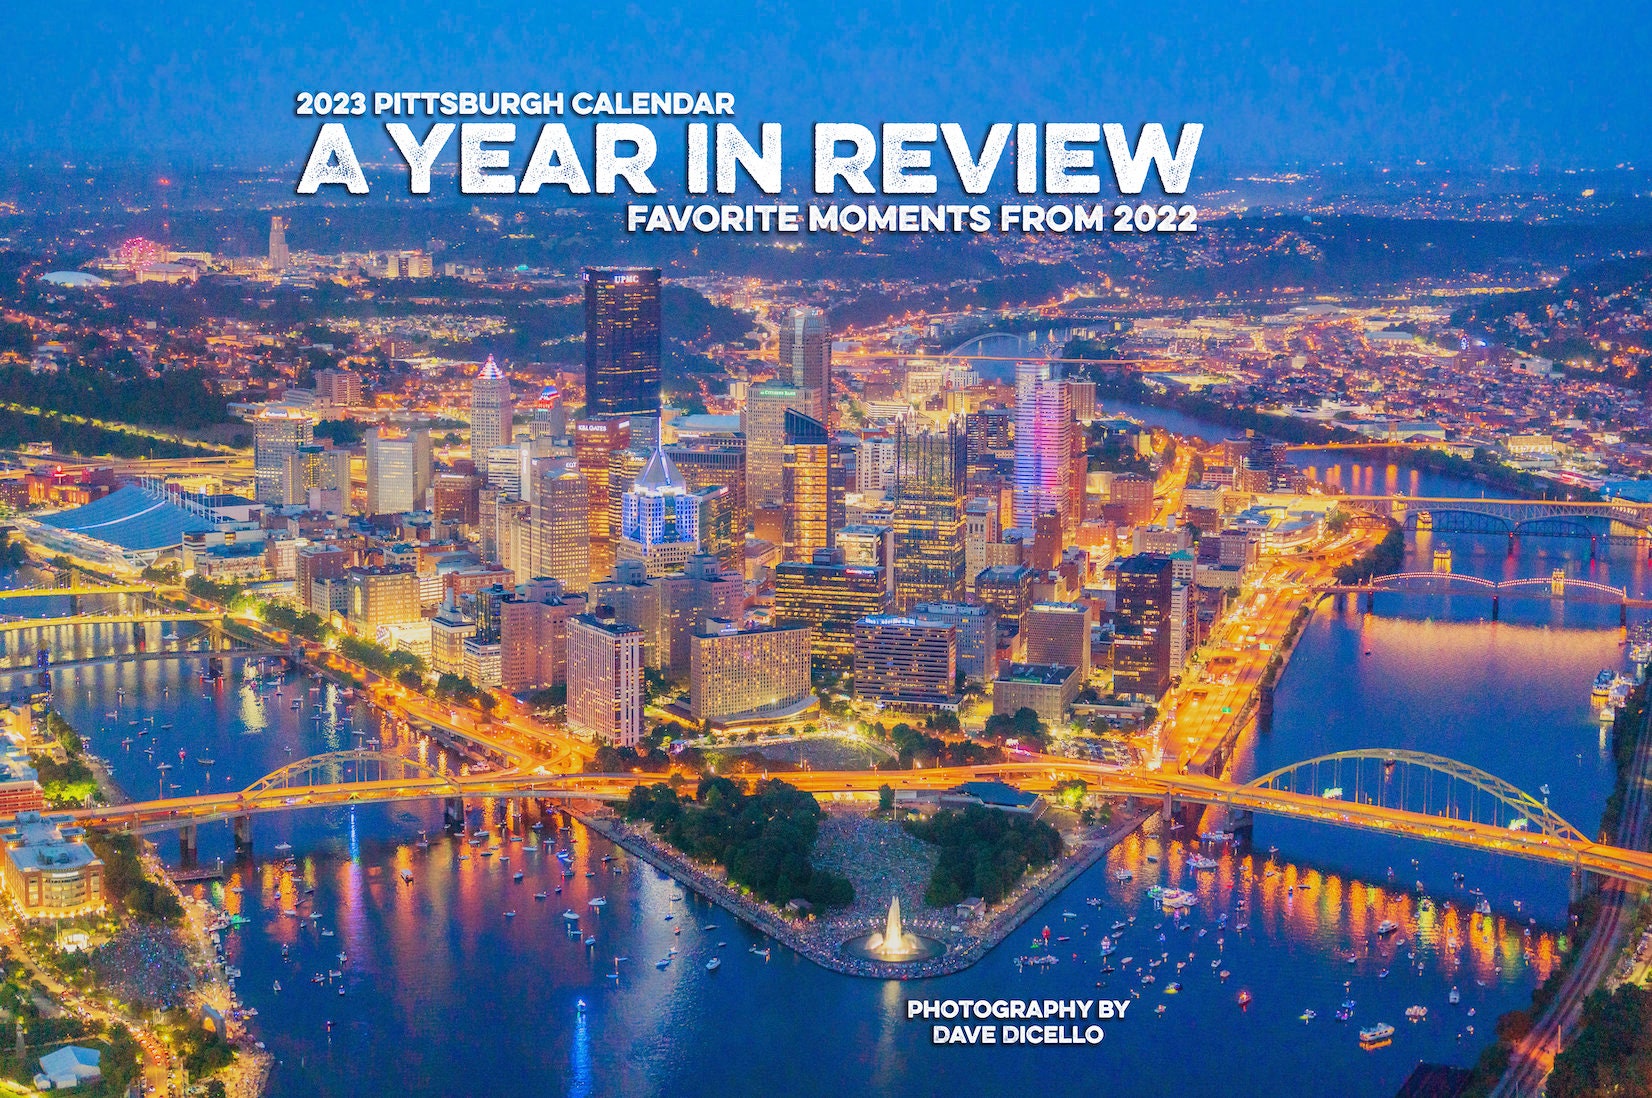 2023 Pittsburgh Calendar - My favorite images of the year